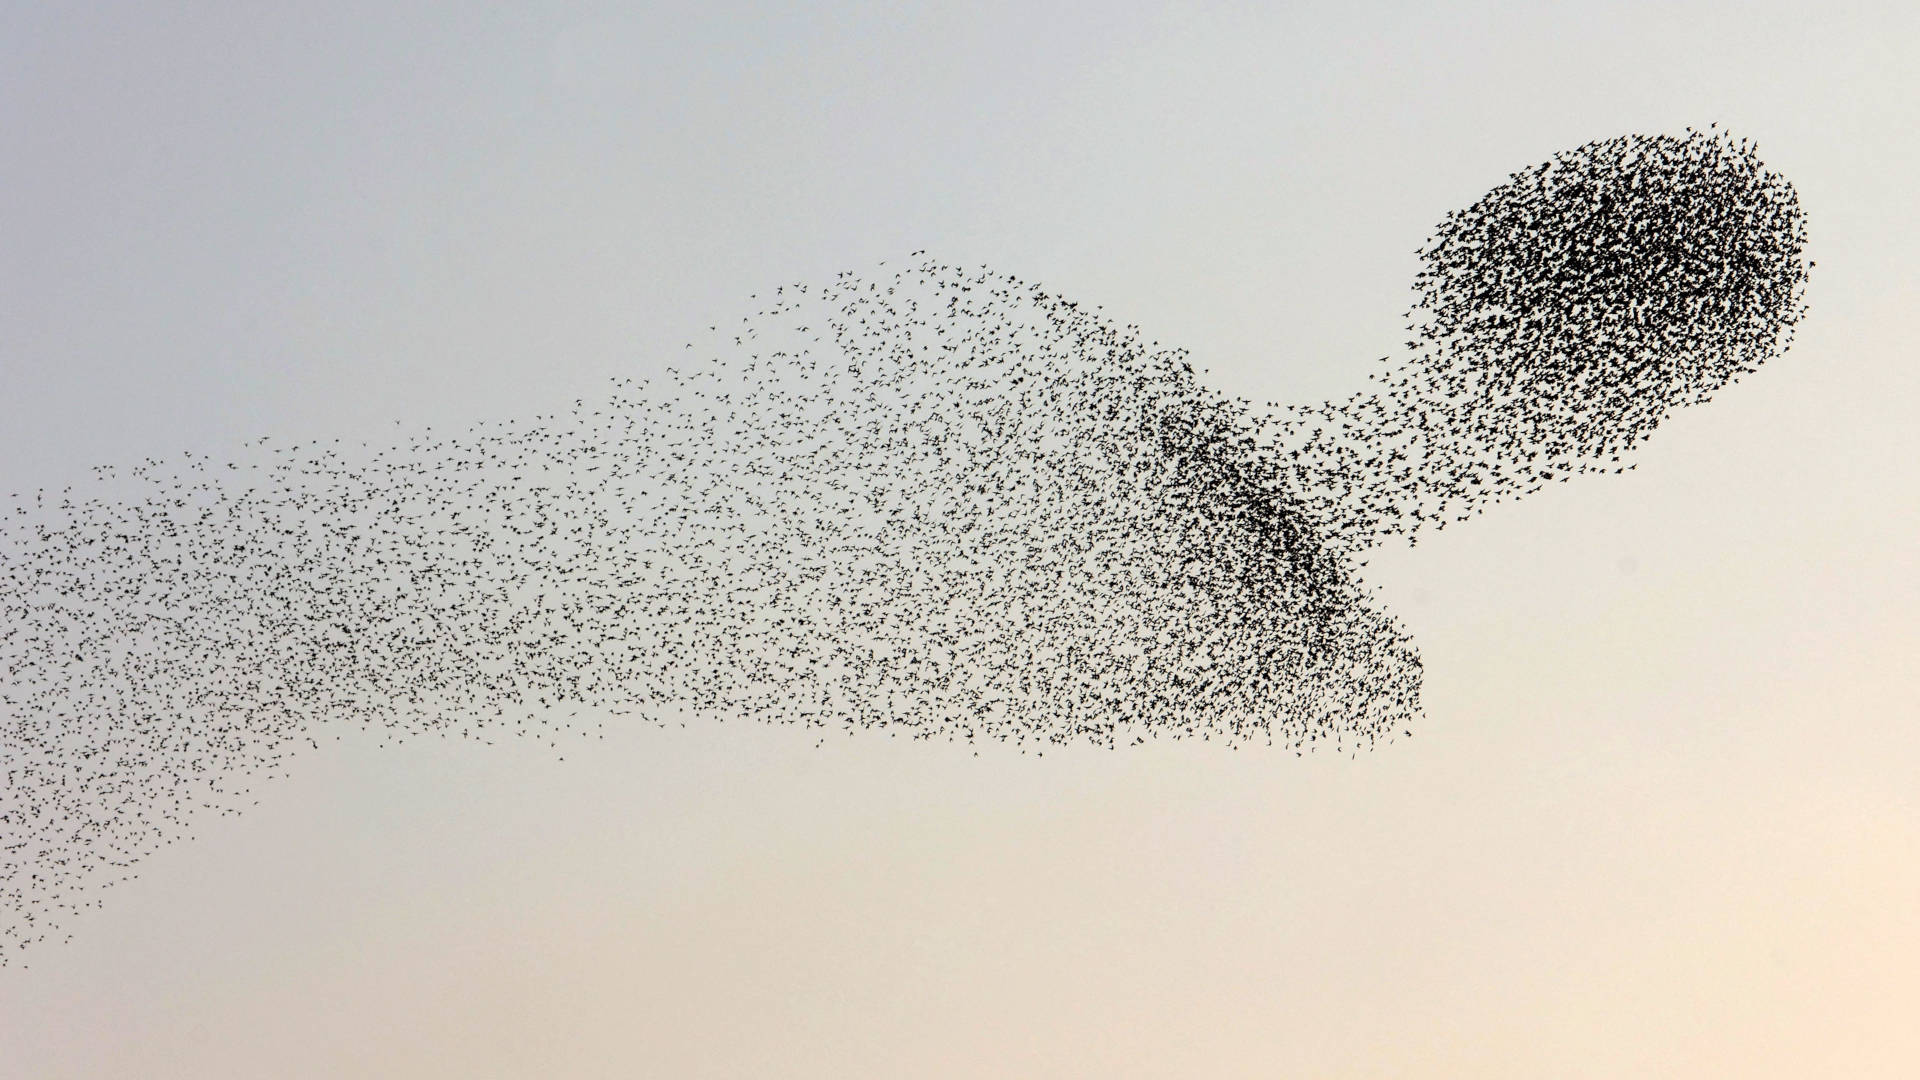 A murmuration of starlings flock above the Negev desert, in southern Israel.